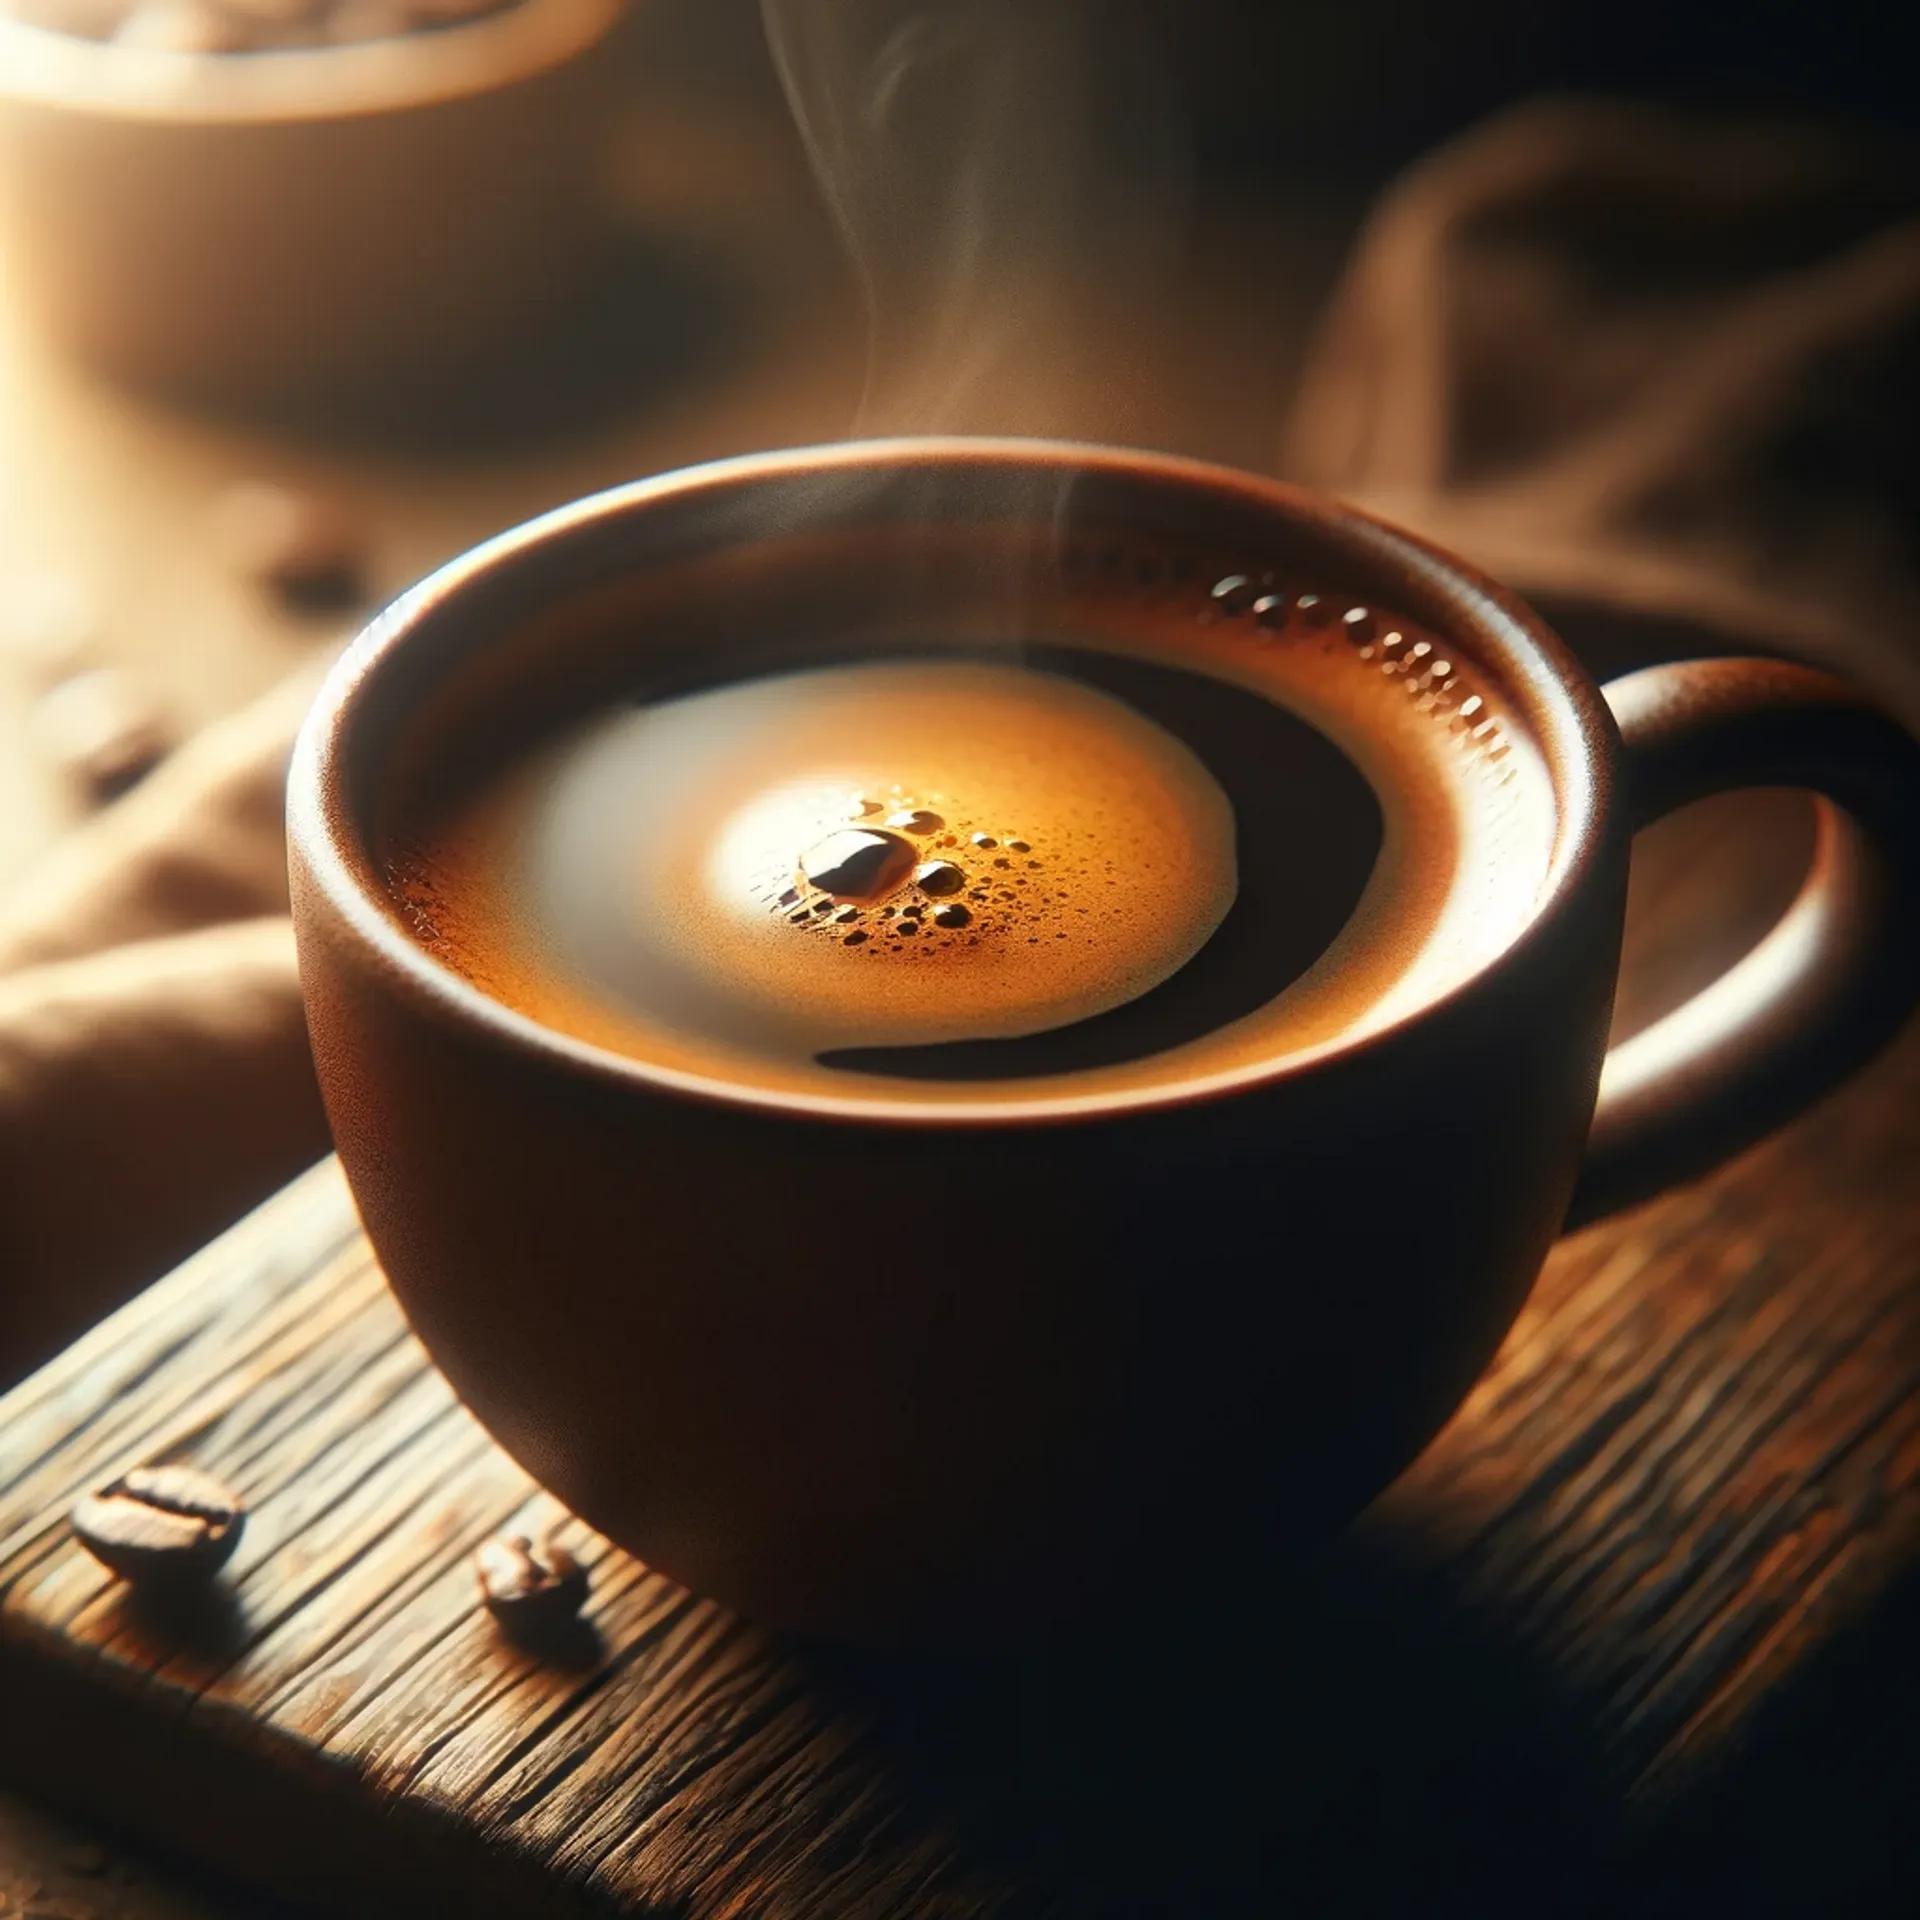 A hot cup of coffee